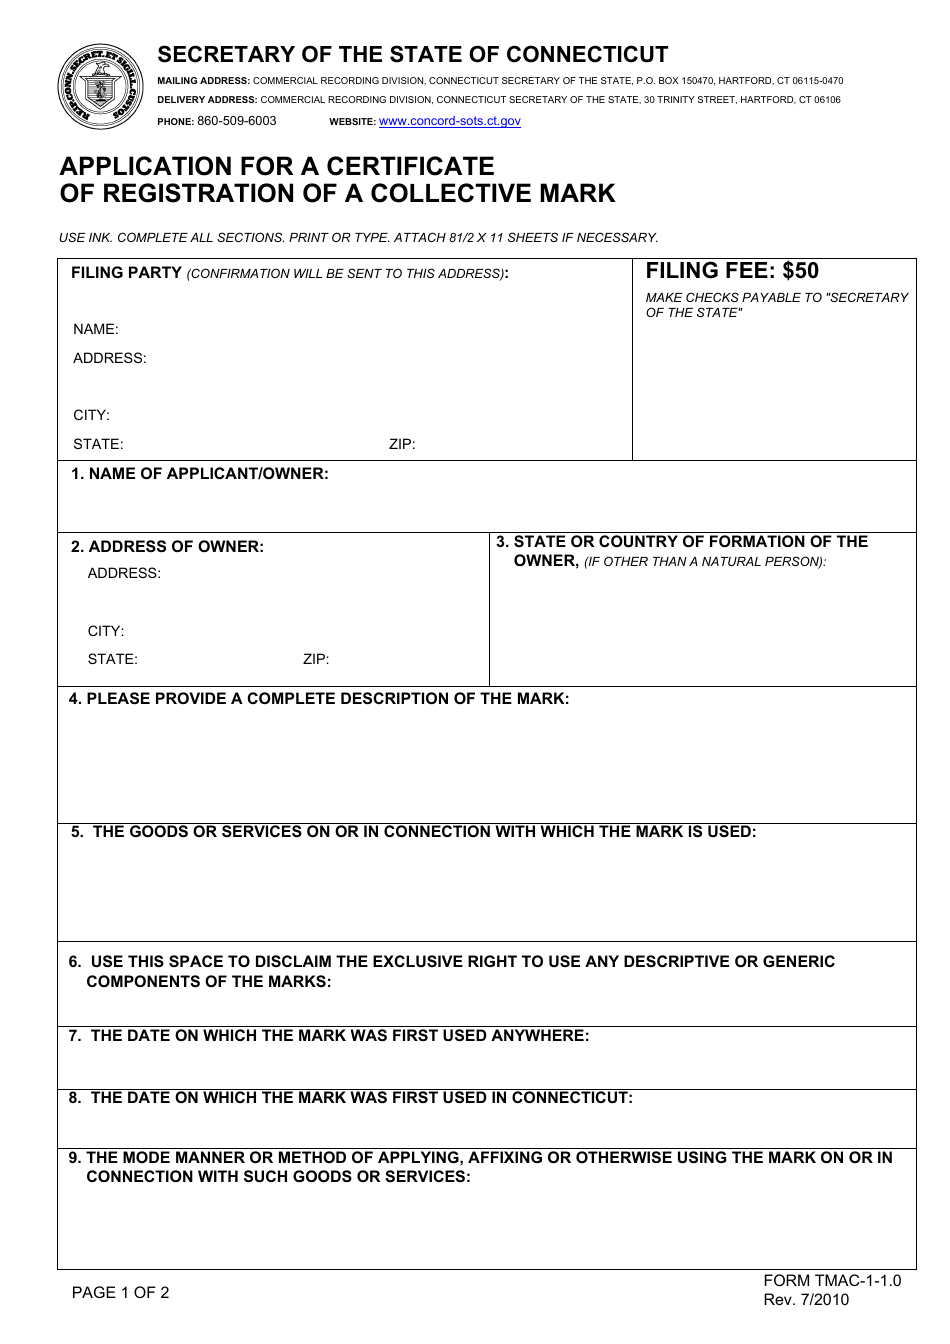 Form TMAC-1-1.0 Application for a Certificate of Registration of a Collective Mark - Connecticut, Page 1